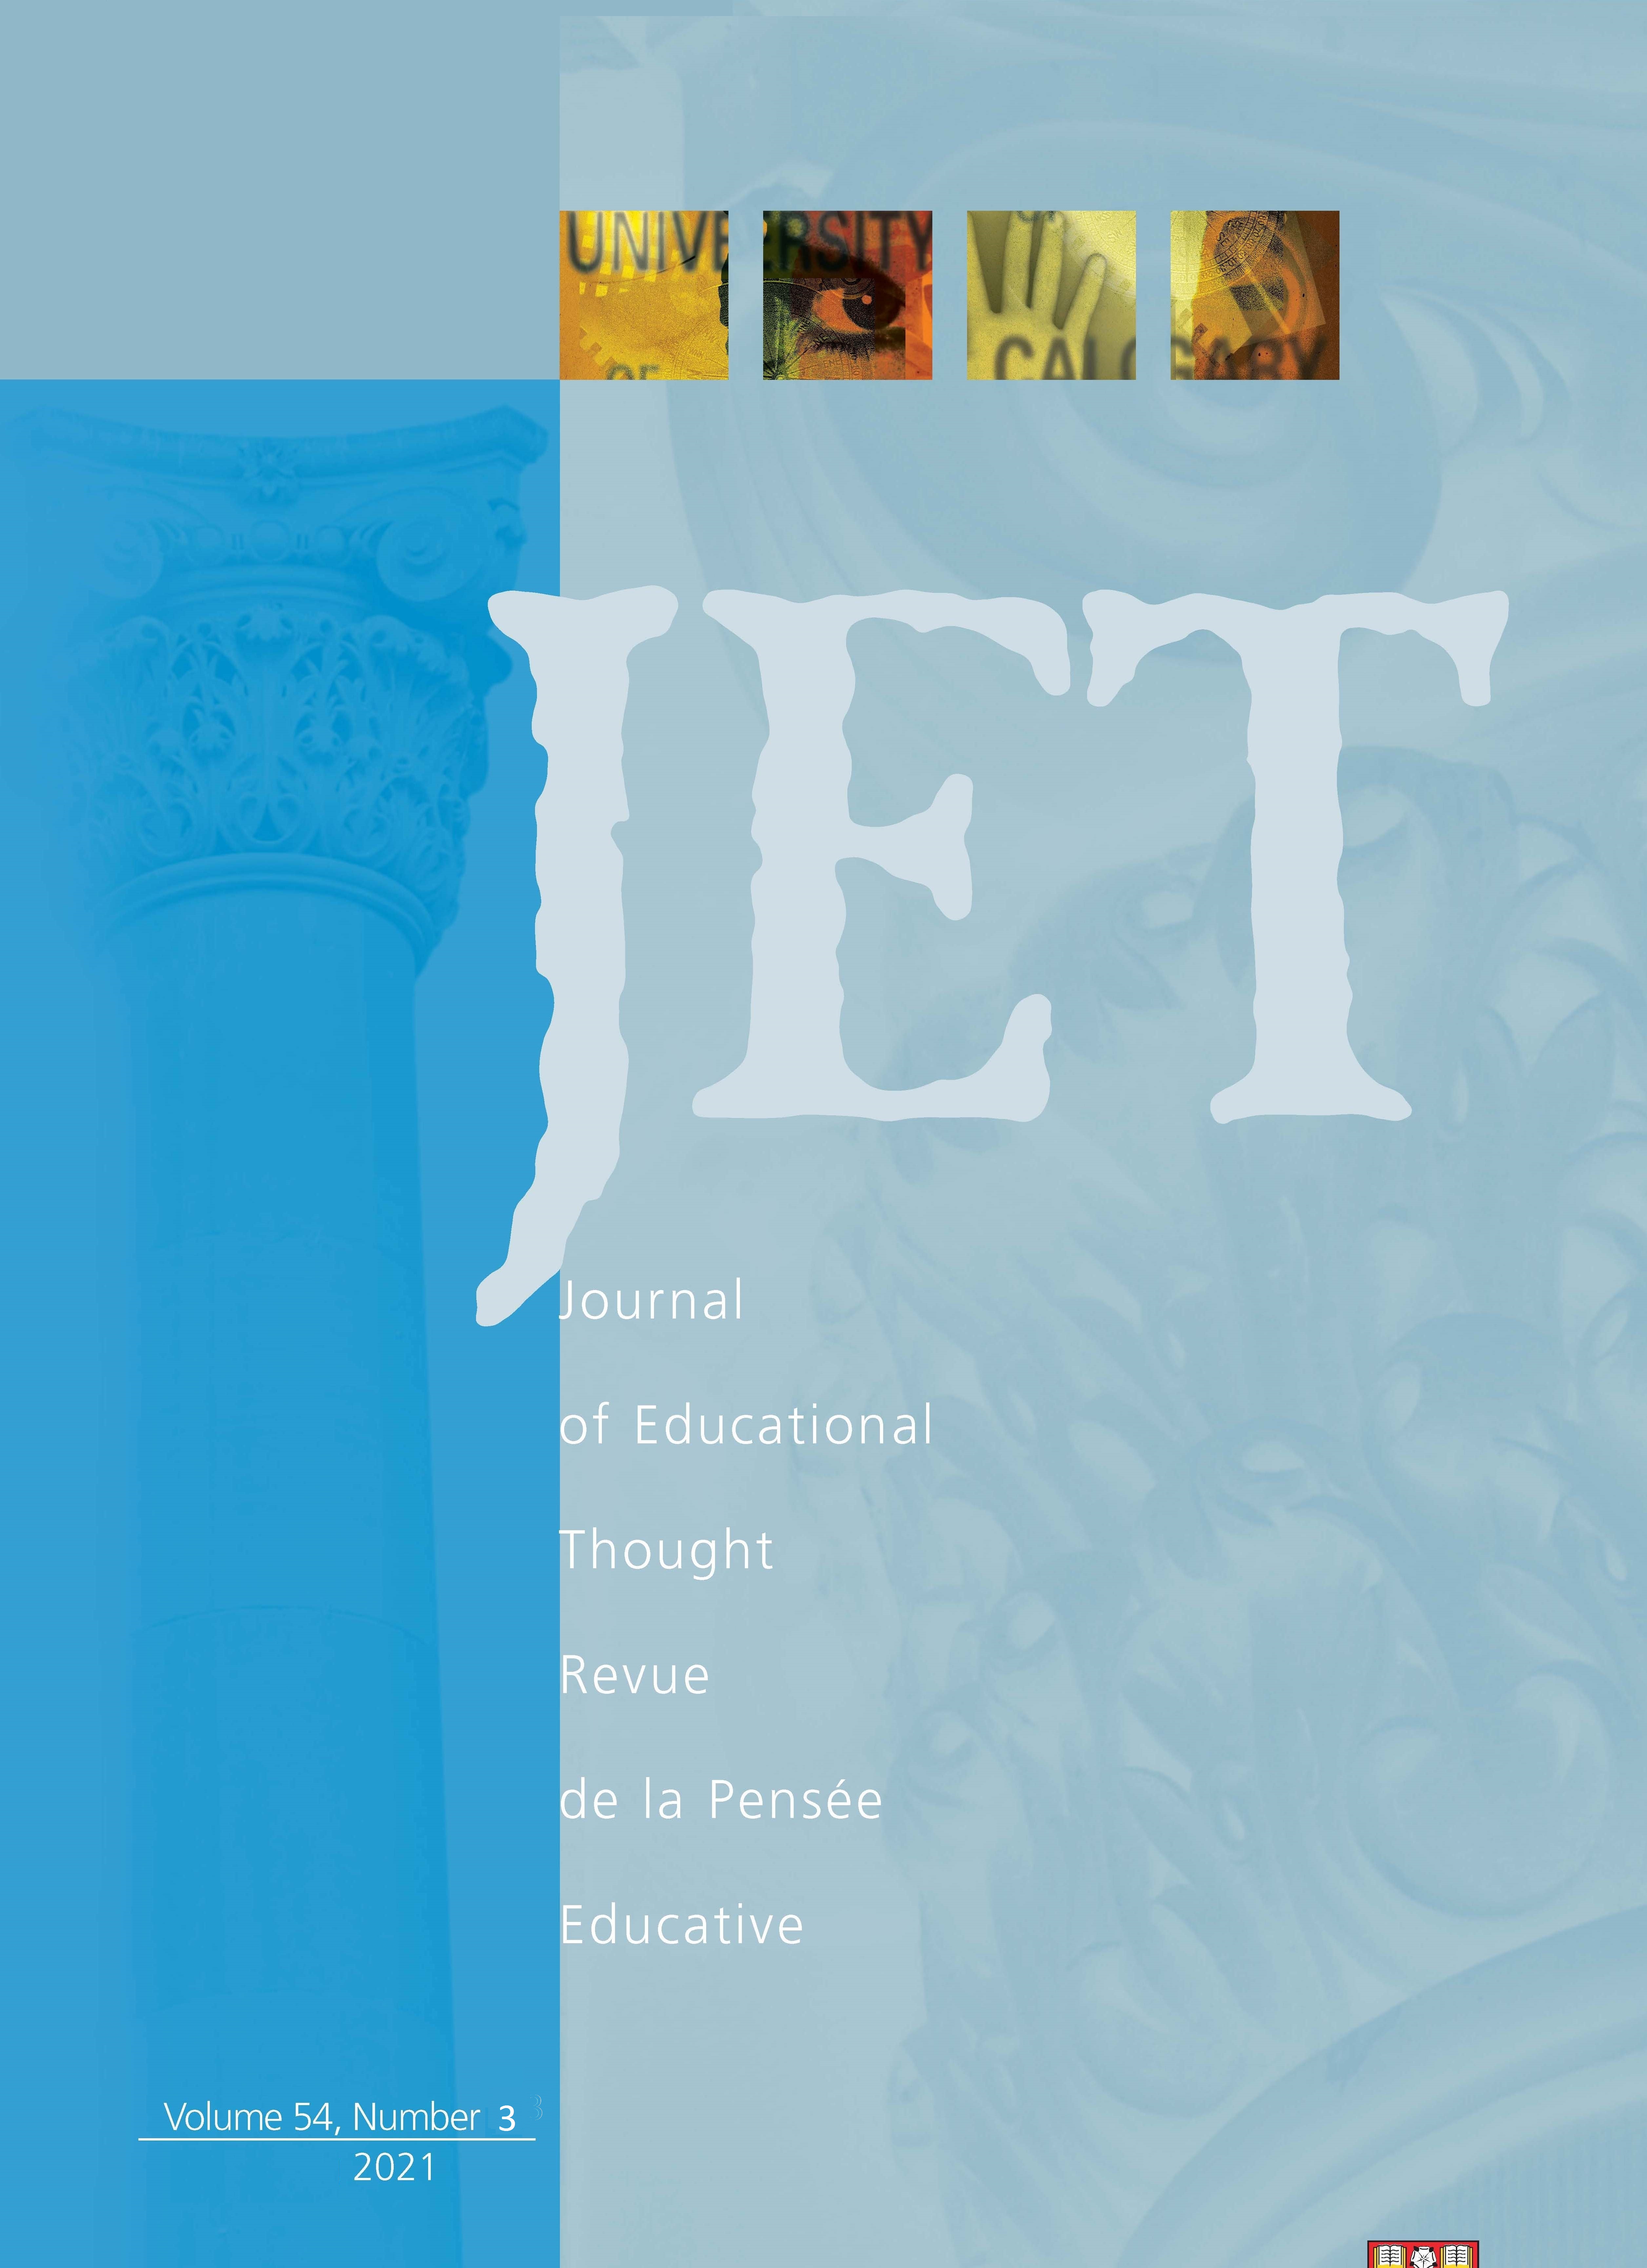 					View Vol. 54 No. 3 (2021): Journal of Educational Thought
				